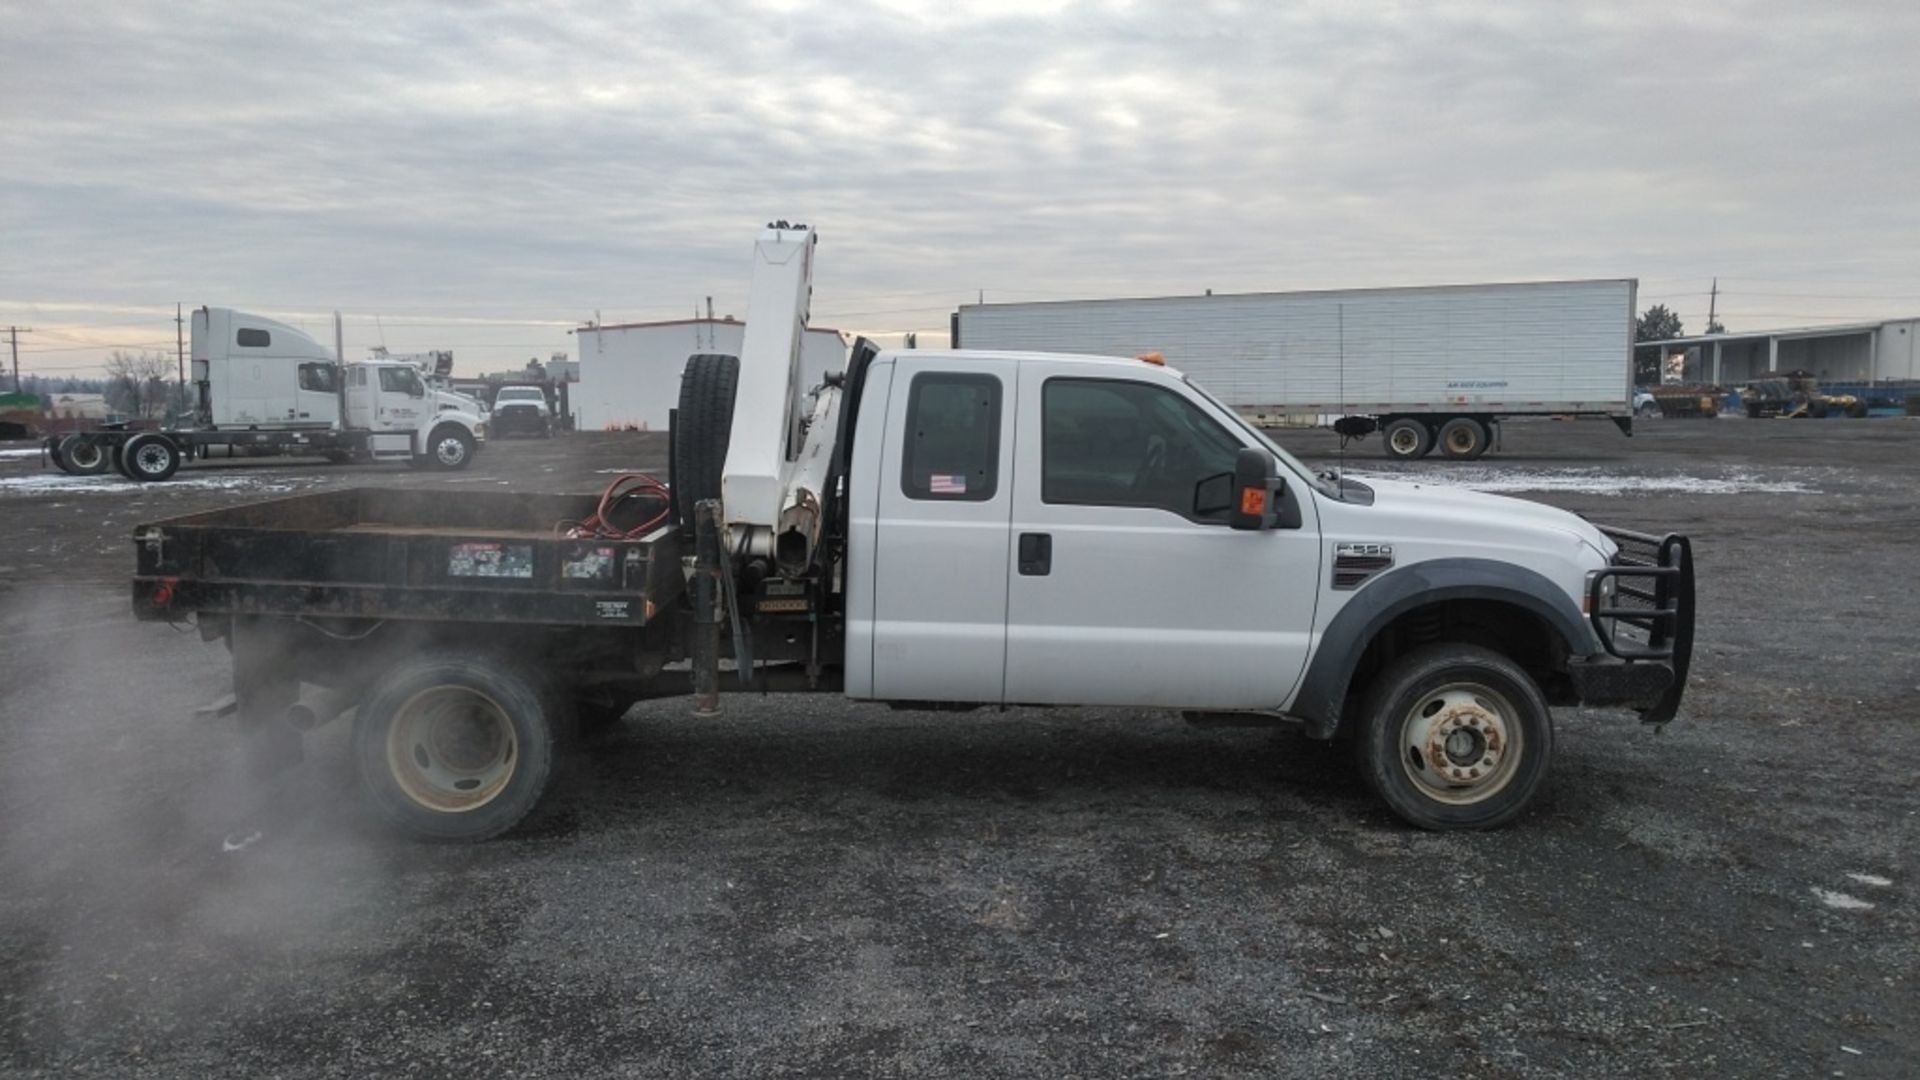 2008 Ford F550 4x4 Extra Cab Flatbed Truck - Image 5 of 30